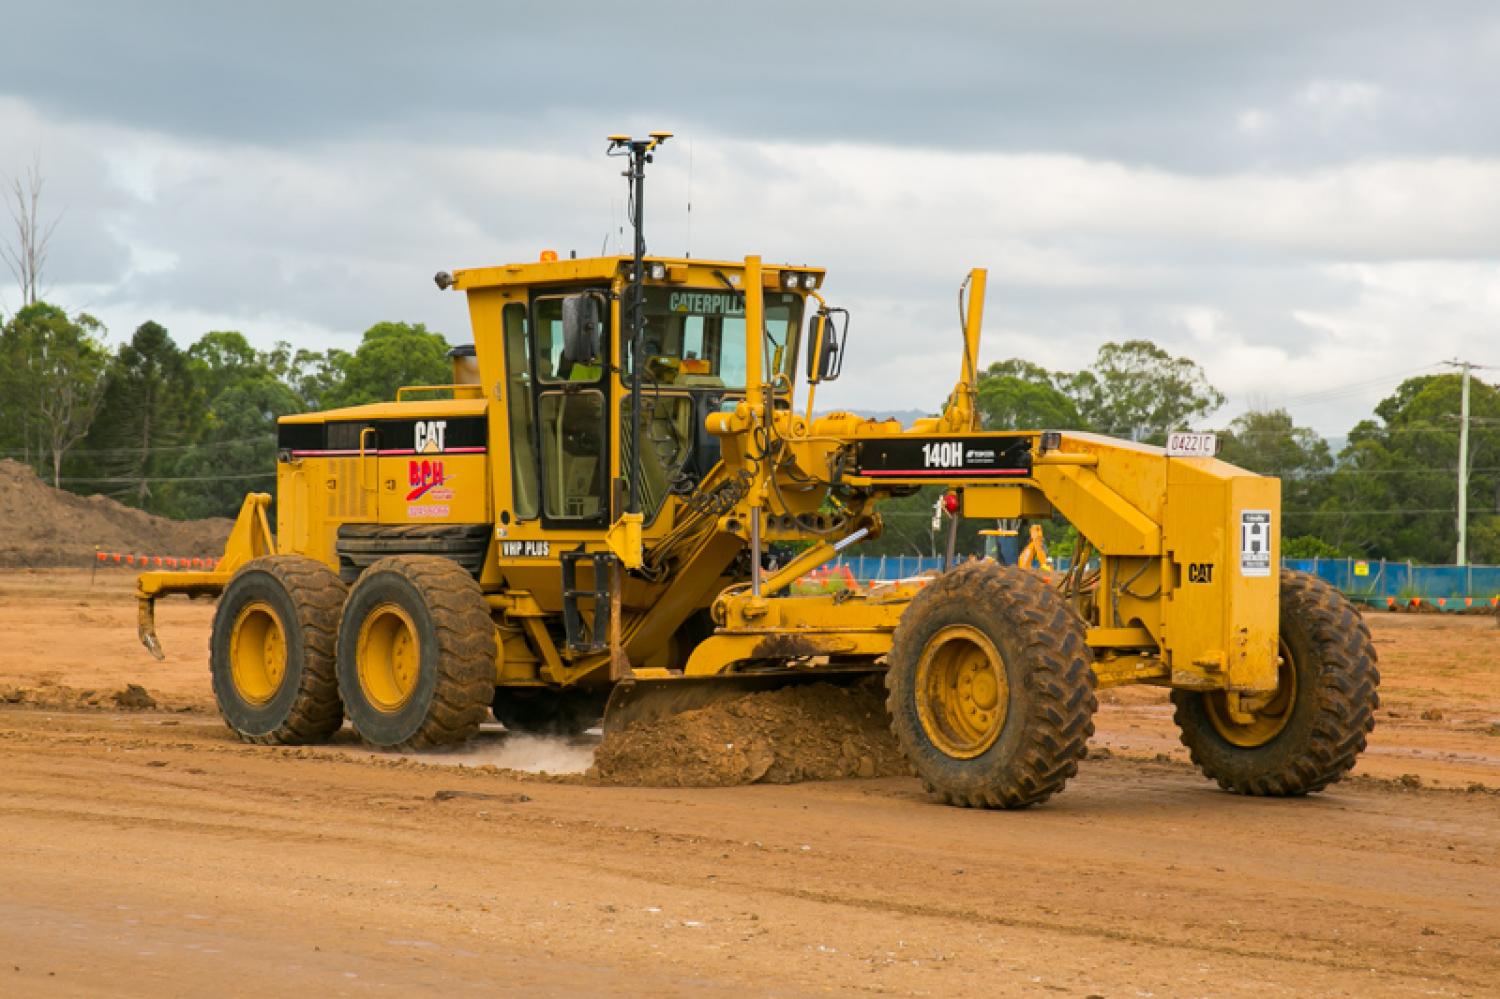 BPH Brancatella Plant Hire has your Grader Hire covered.  No project is too big or too small!

BPH Brancatella Plant hire can supply you with a wide range of wet hire Graders in the shortest possible time.